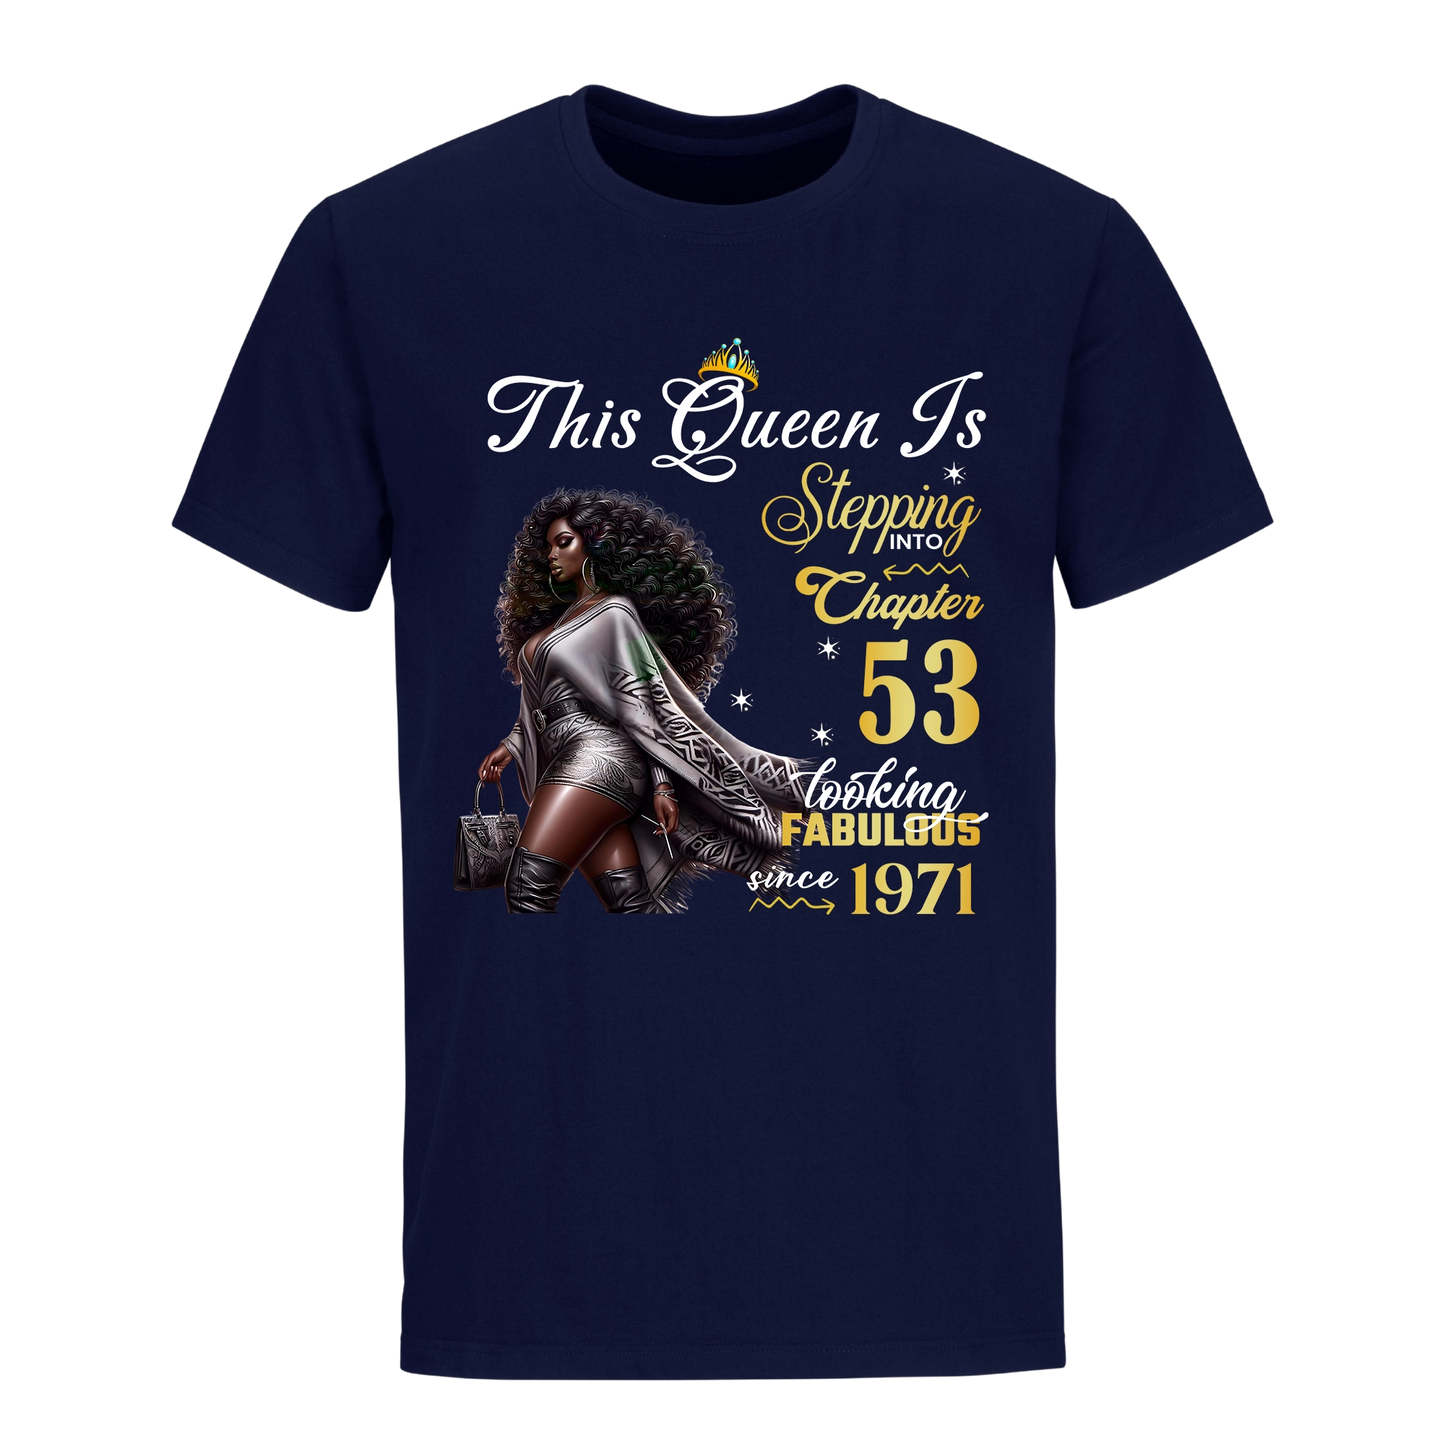 THIS QUEEN IS FABULOUS 53 UNISEX SHIRT